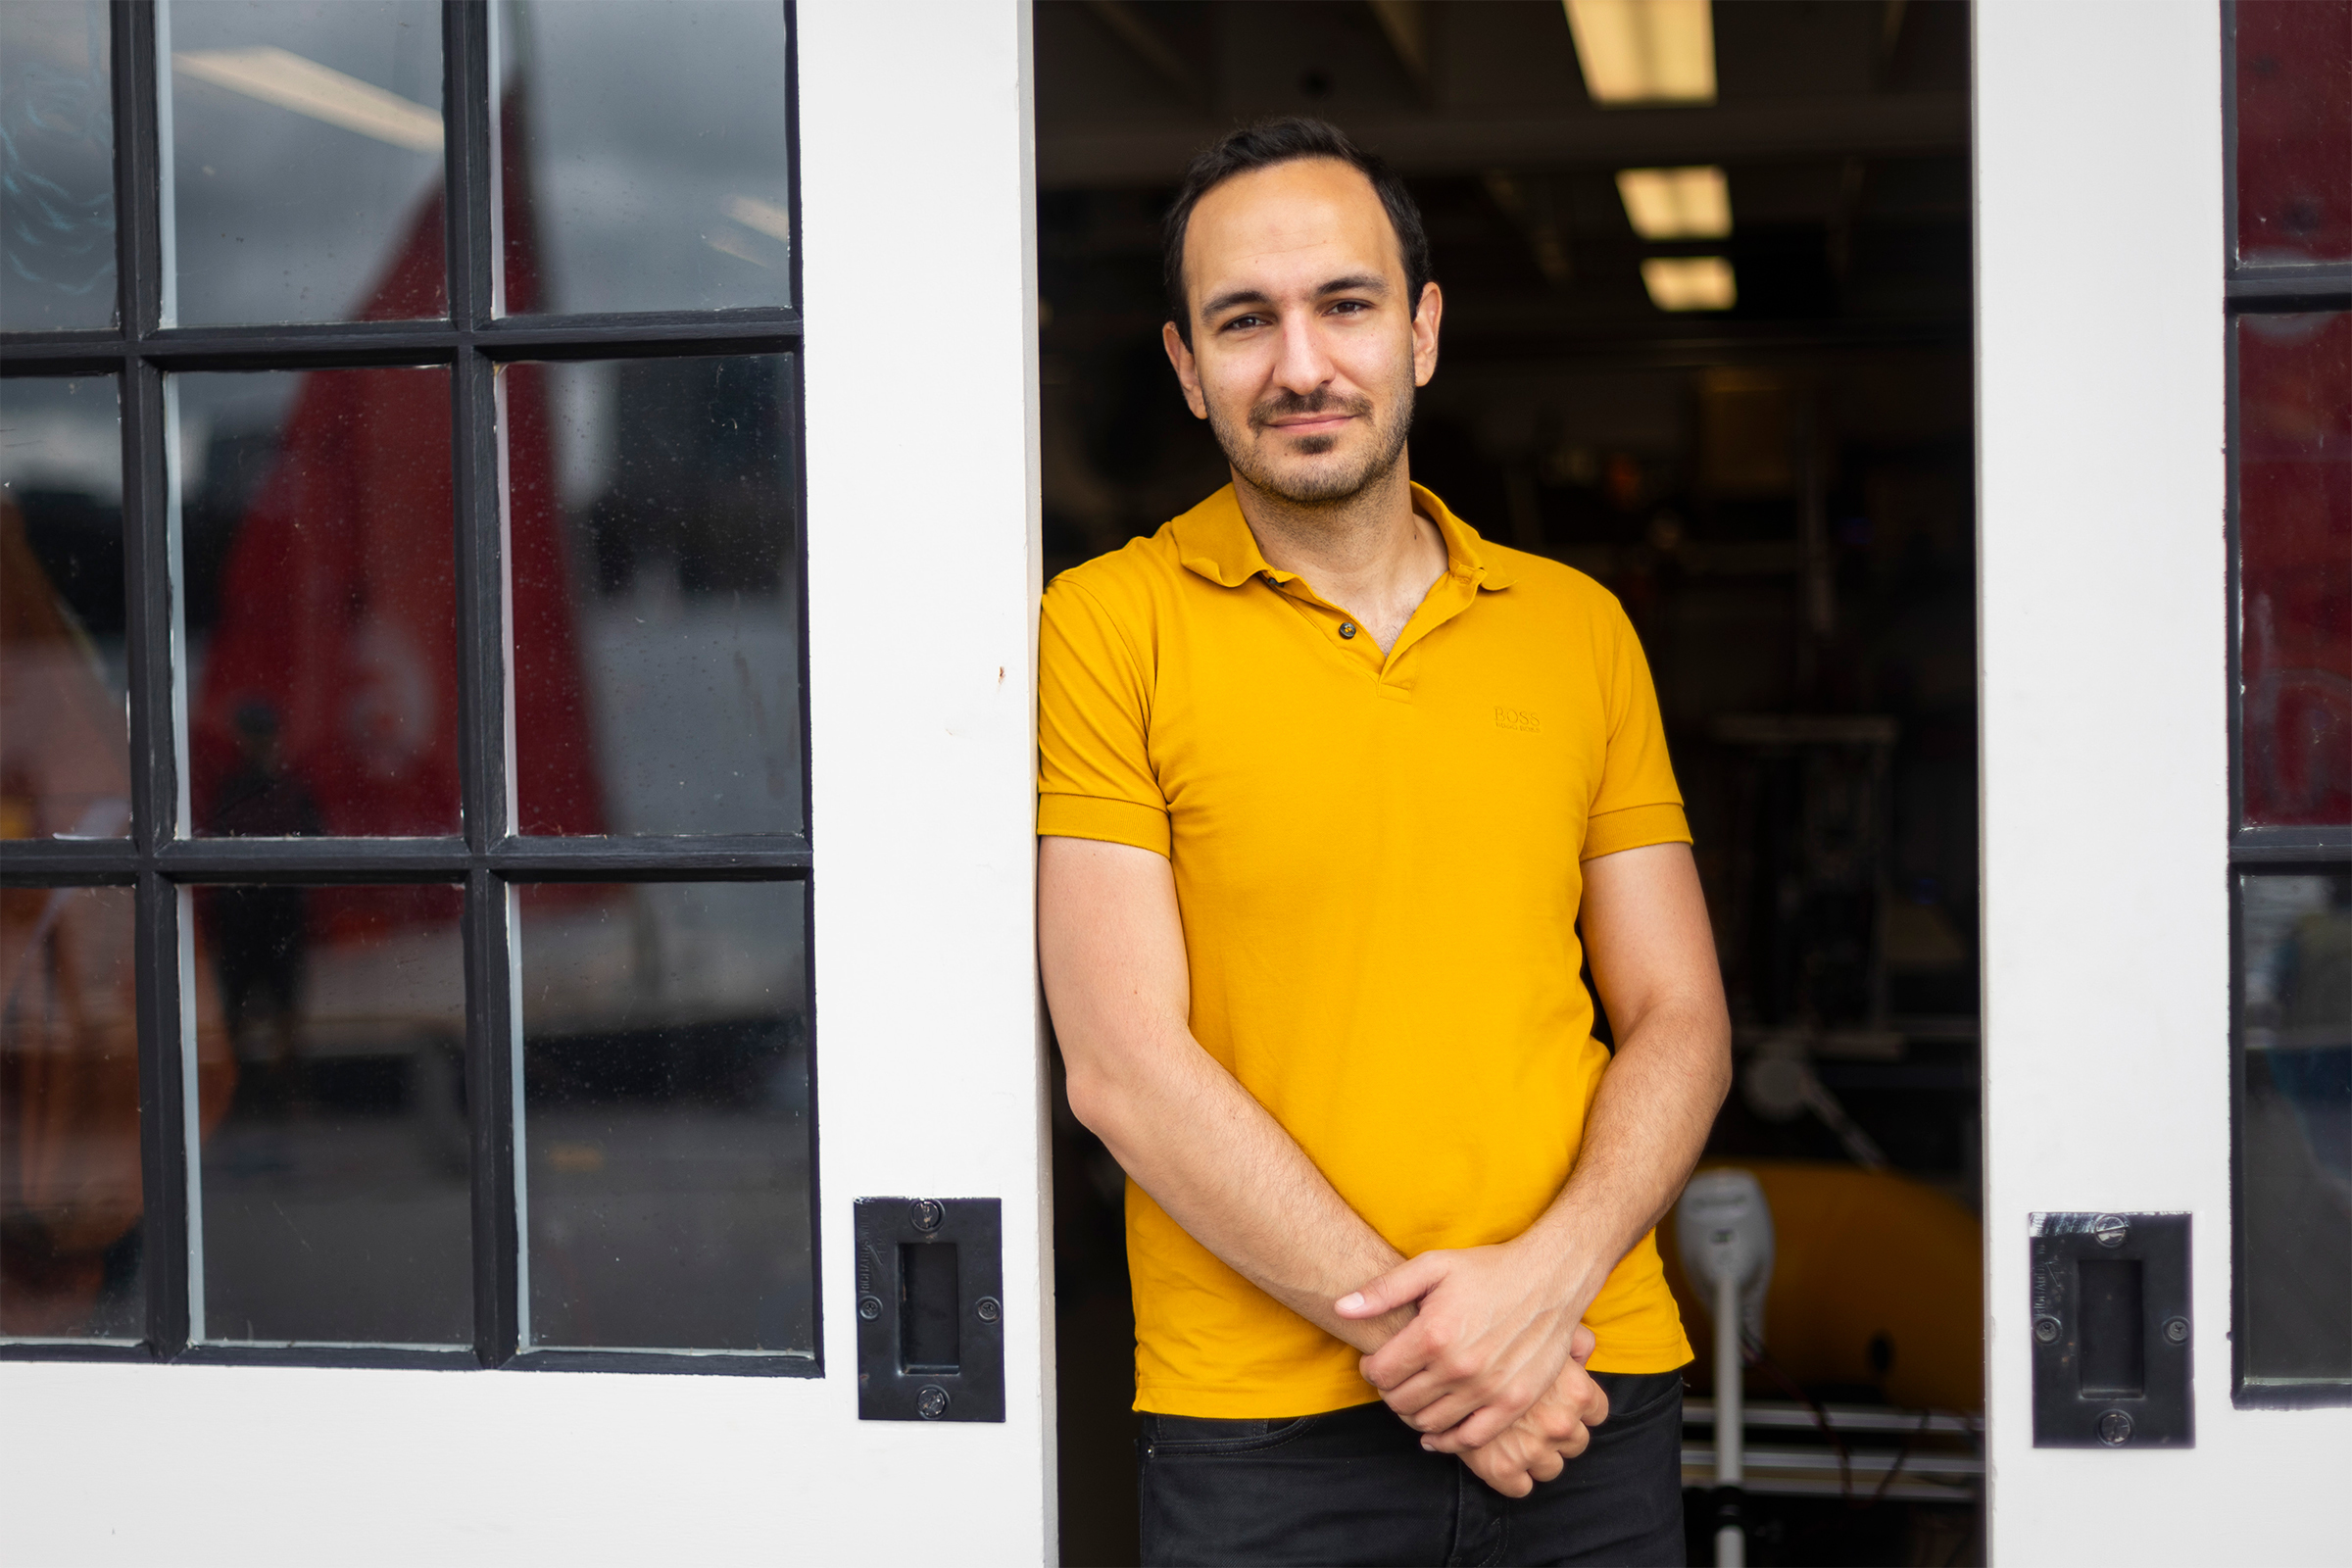 Fadel Adib, associate professor in the Department of Electrical Engineering and Computer Science and the Media Lab, seeks to develop wireless technology that can sense the physical world in ways that were not possible before.